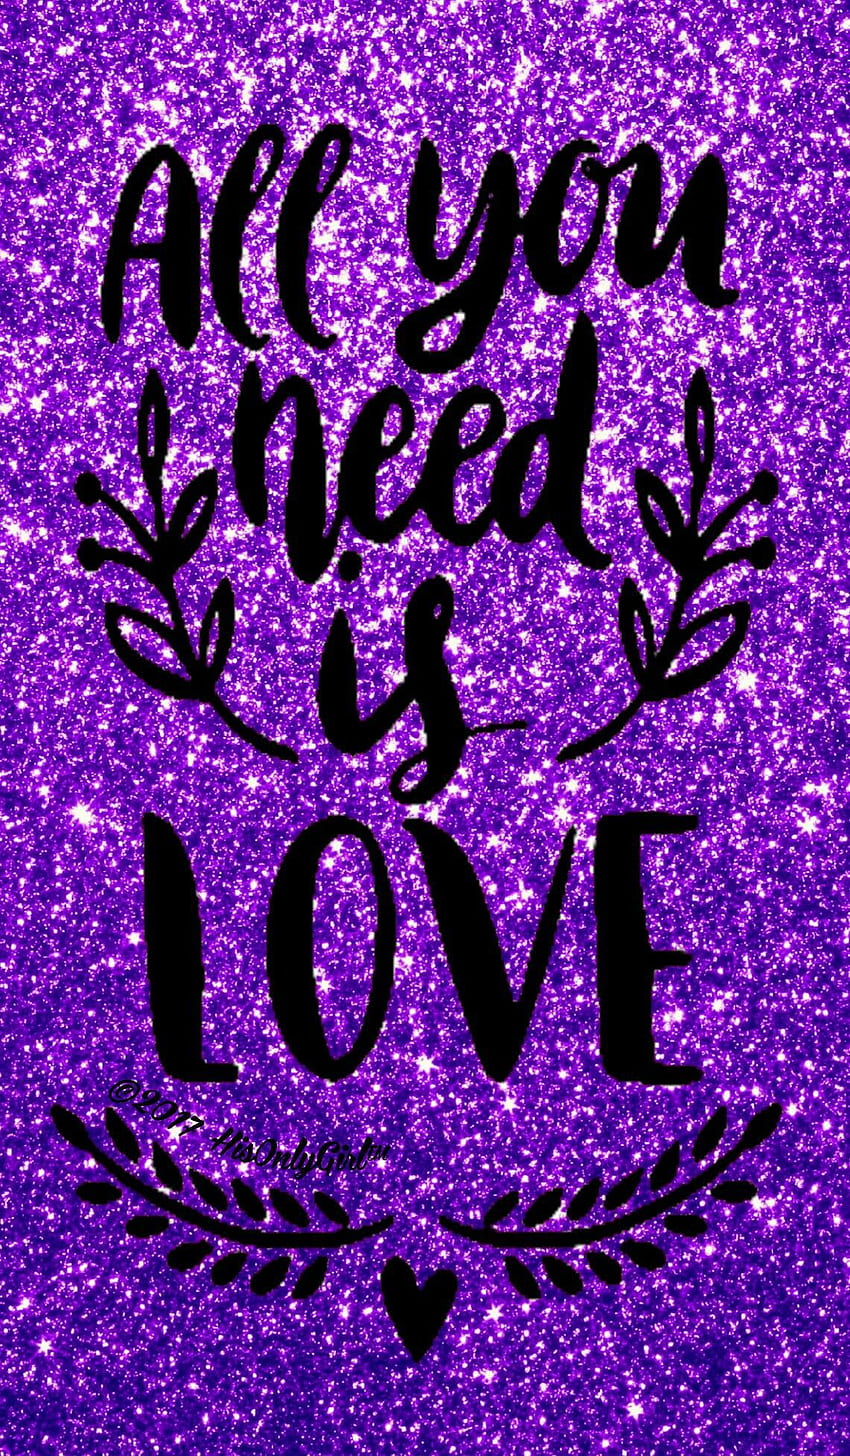 All You Need Is Love Glitter I Created For The App Cocoppa Glitter